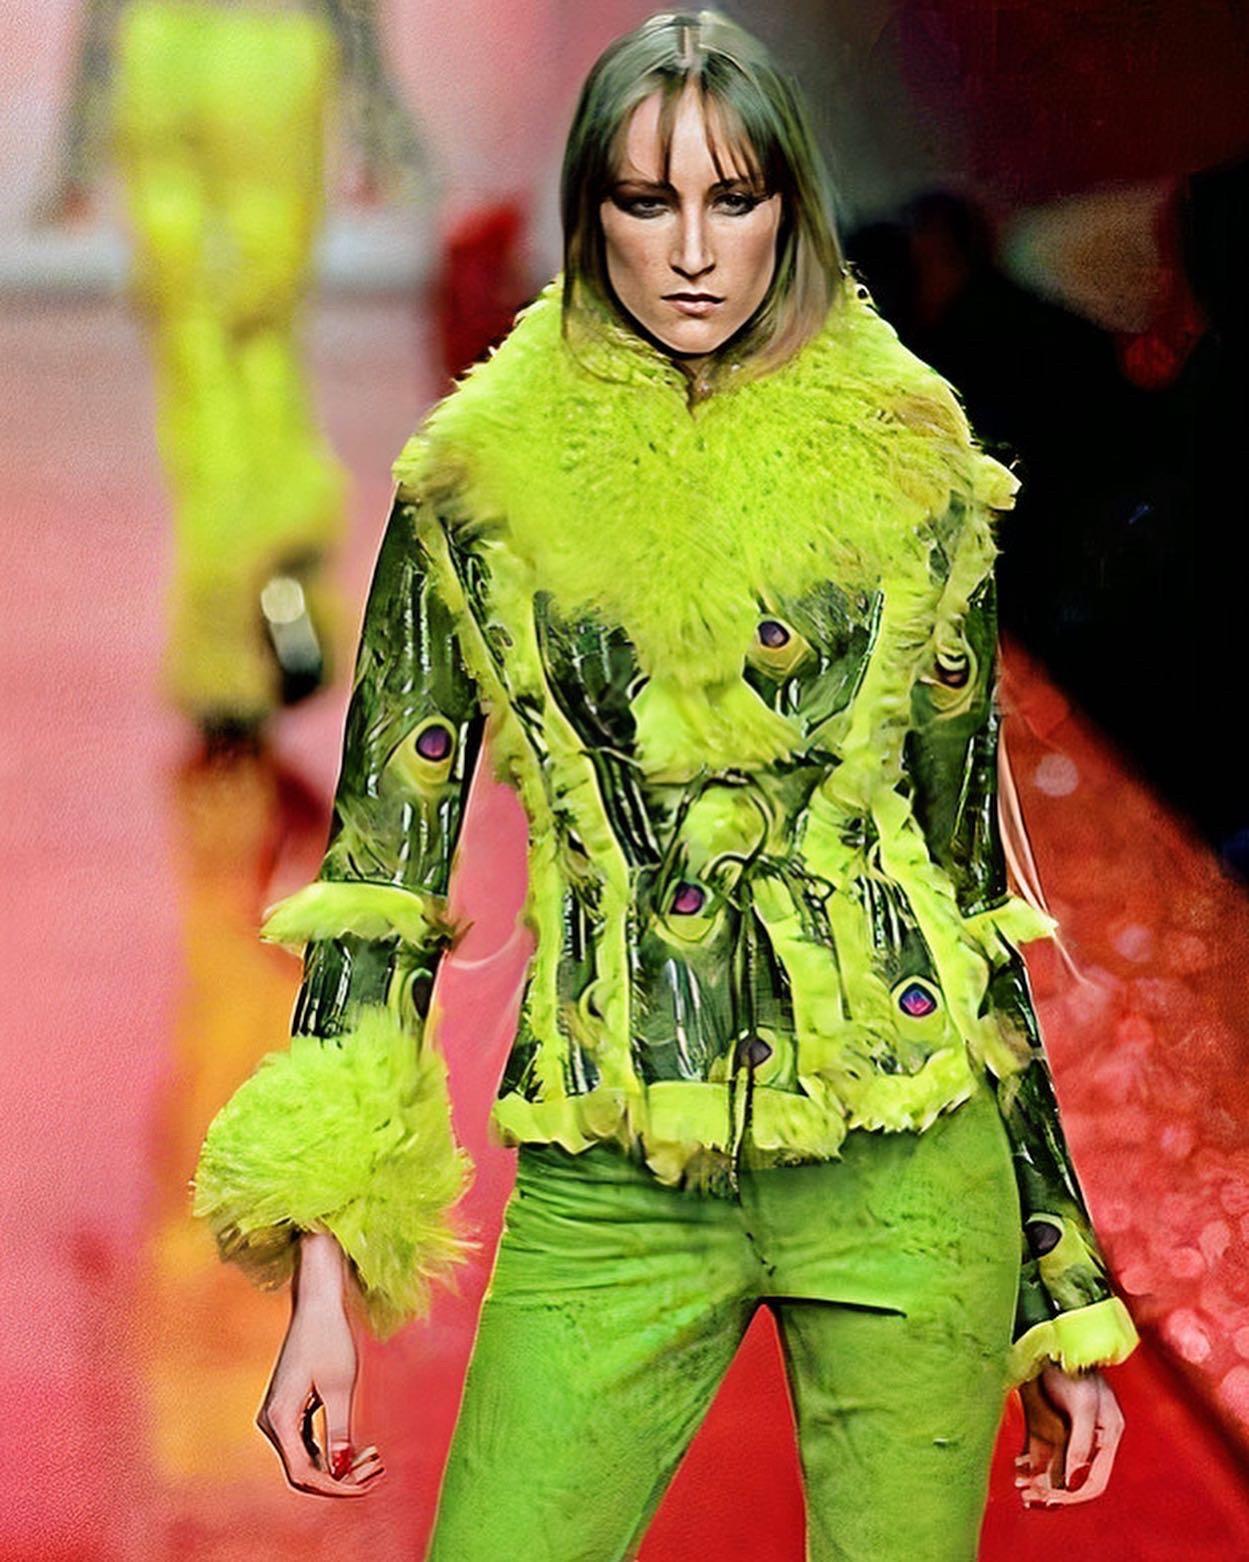 This fabulous vintage Roberto Cavalli shearling coat with bright hand painted leather with peacock print and long-haired neon fur is reversible and can be worn on both sides, for those who get bored of their wardrobe easily! 

The shearling coat was